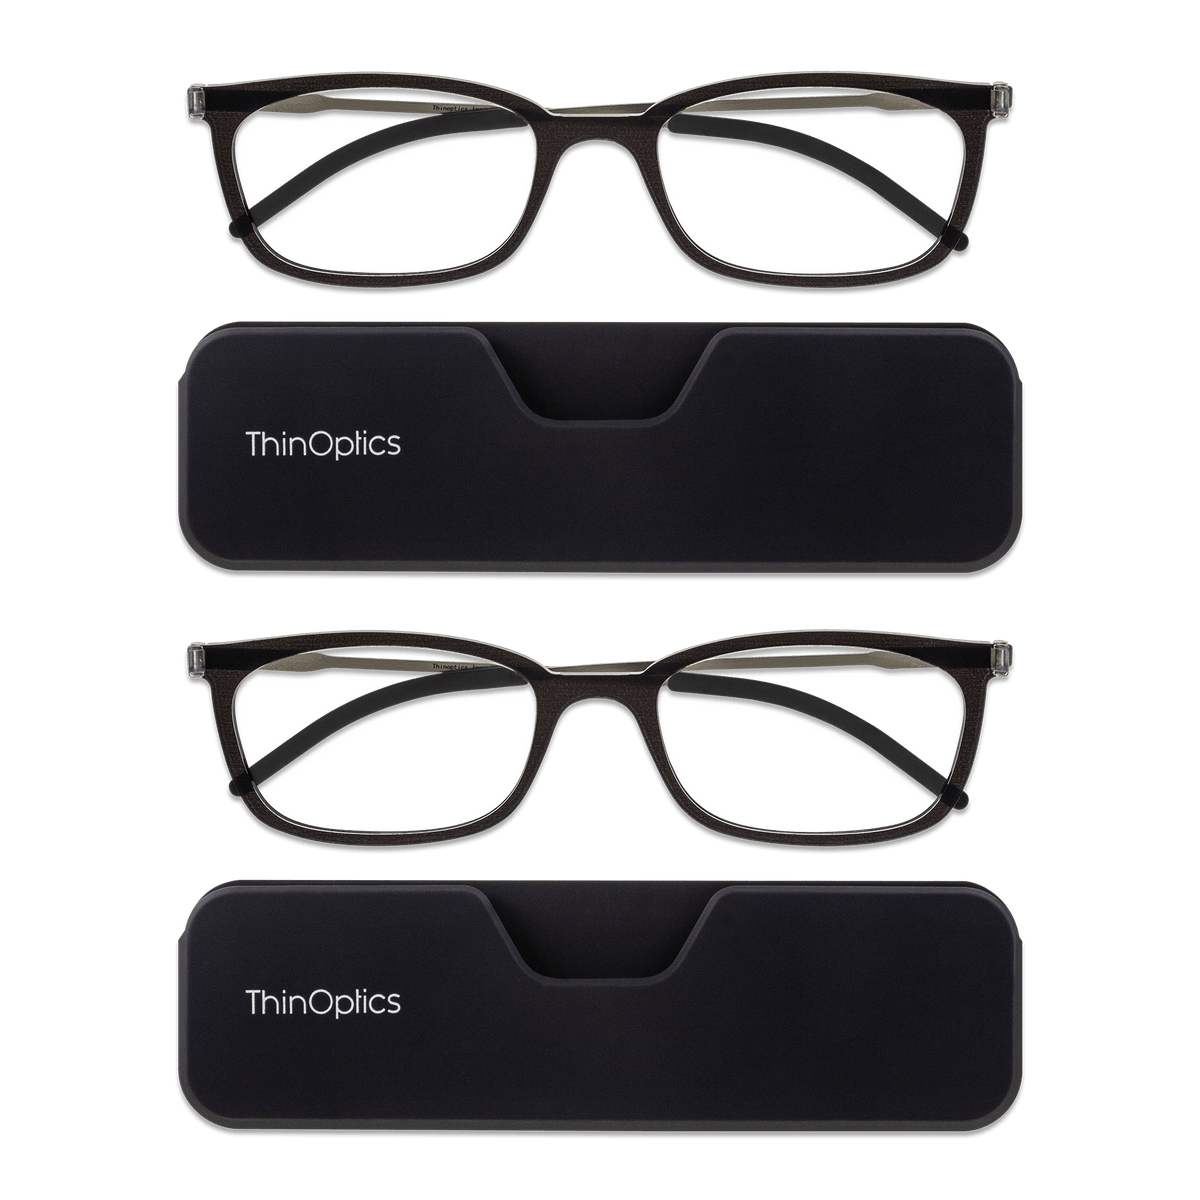 ThinOptics | 2-Pack Connect + Connect Case | Readers & Reading Glasses